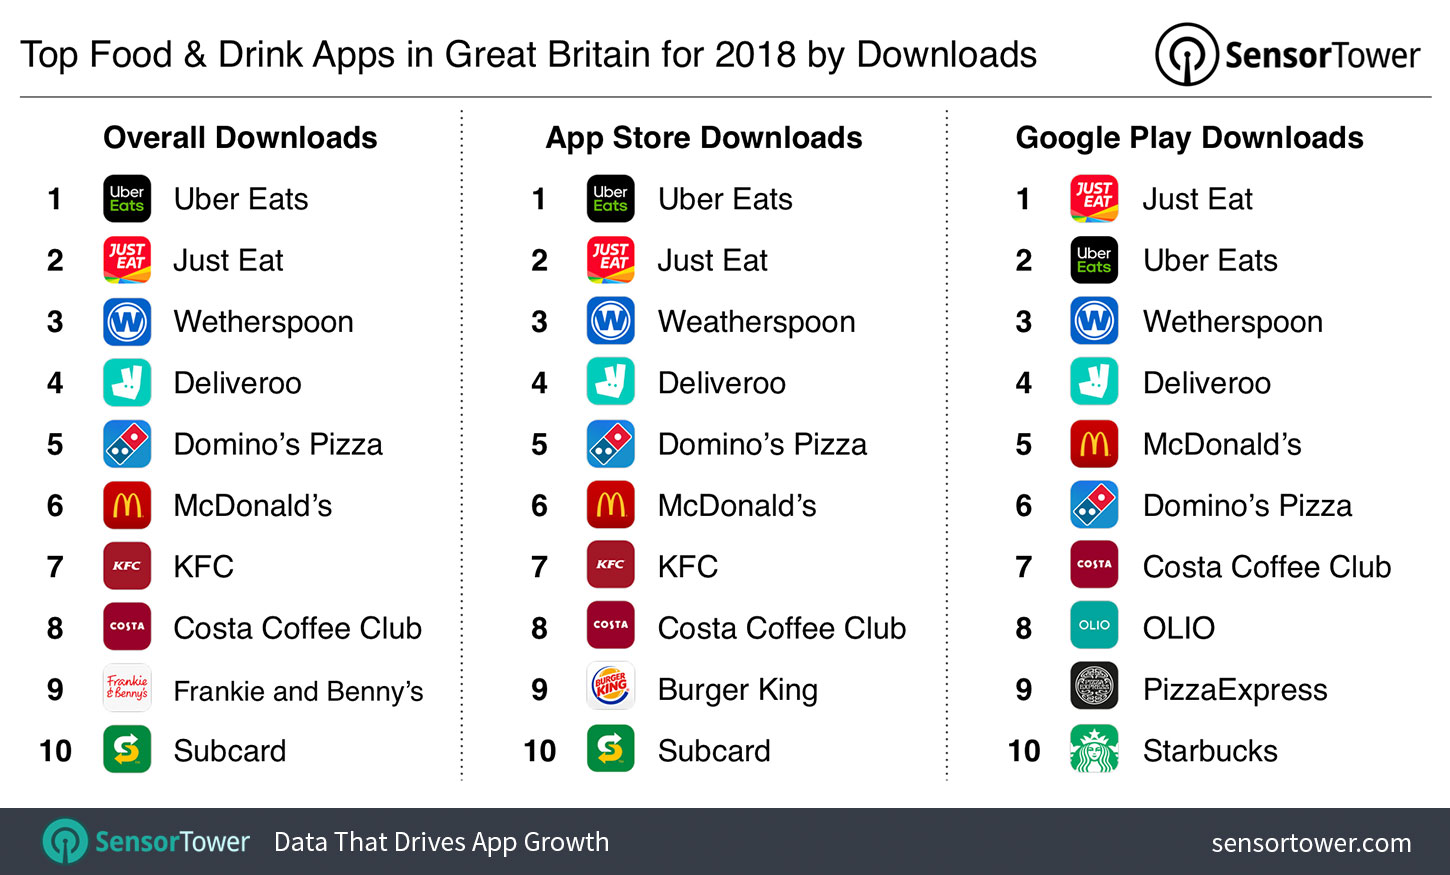 Top Food & Drink Apps in Great Britain for 2018 by Downloads